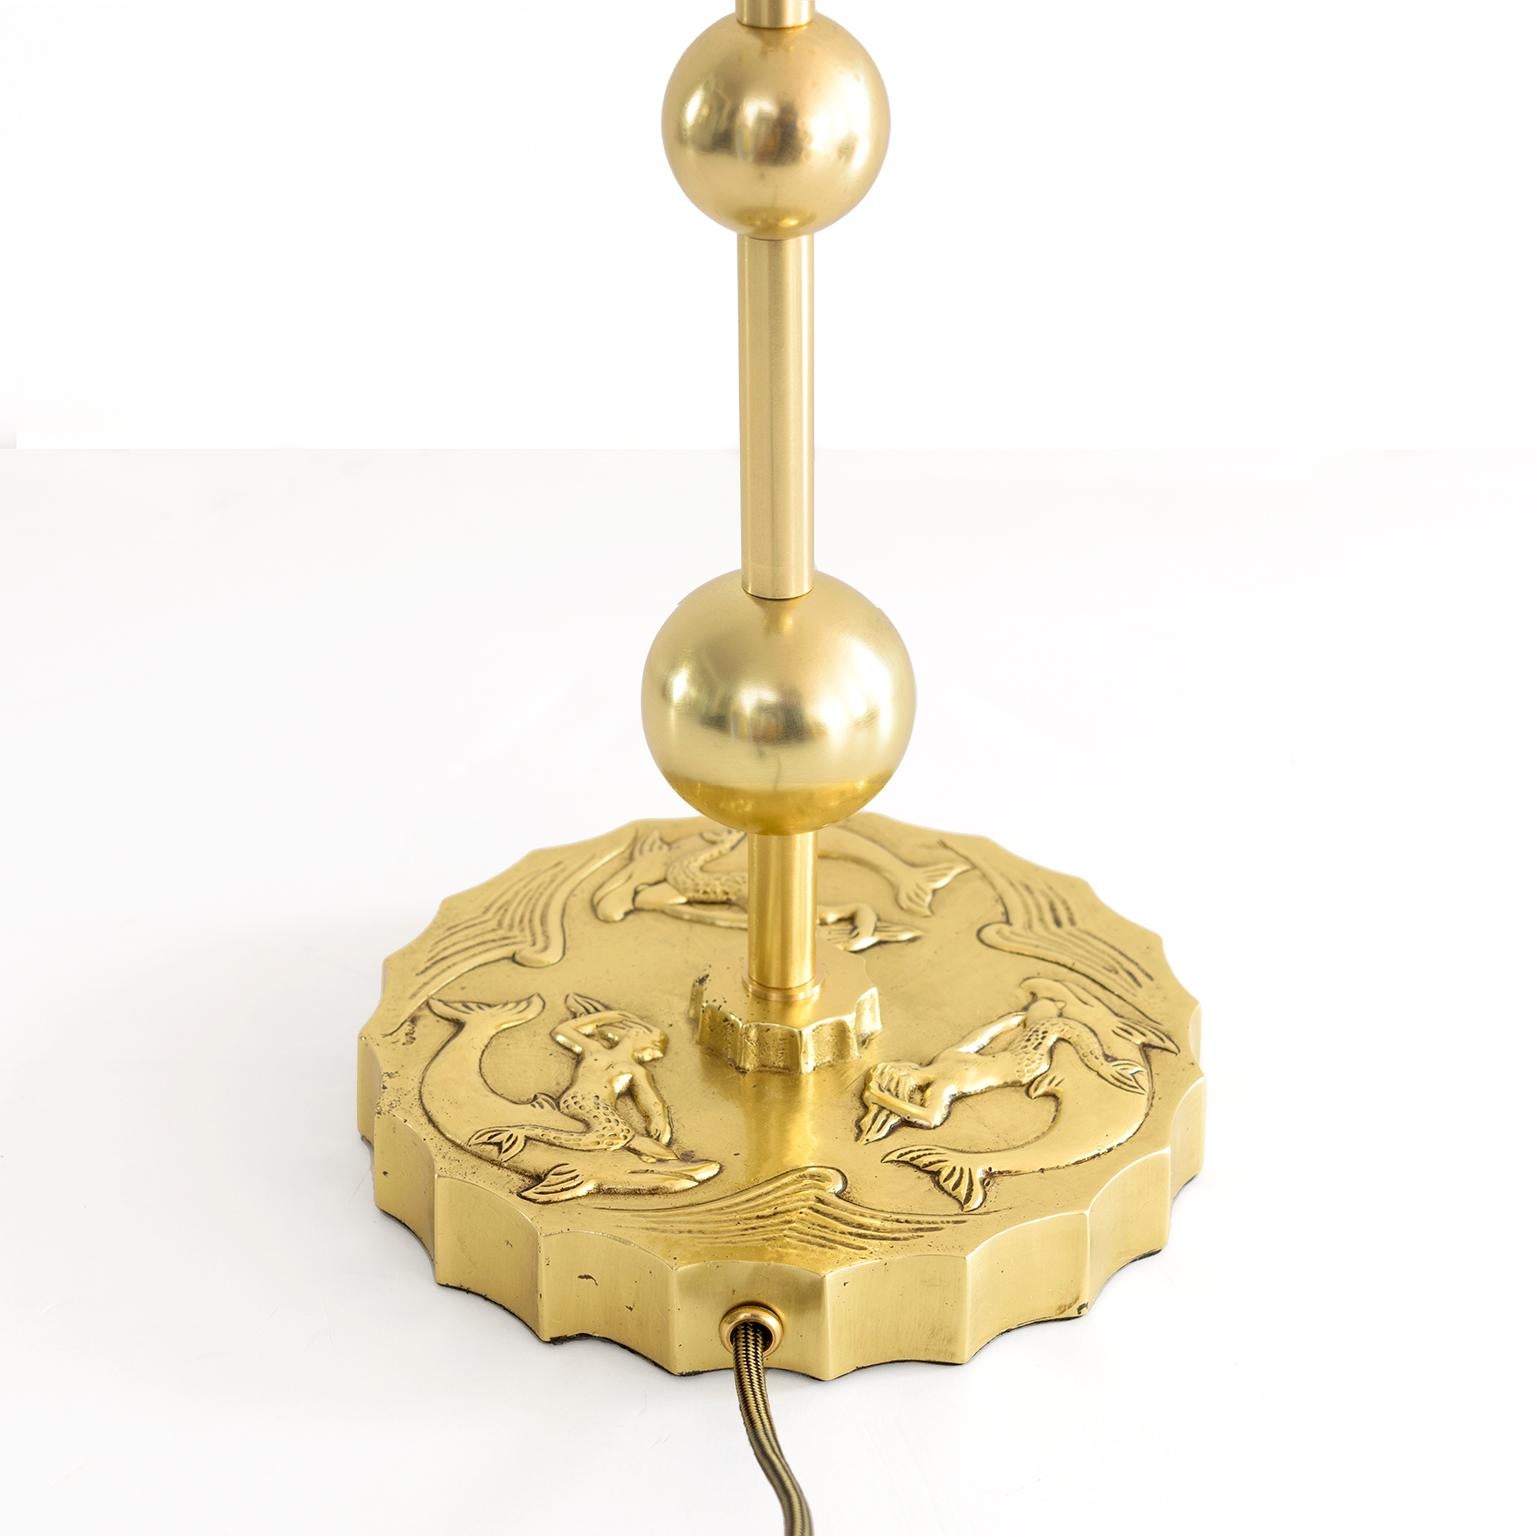 Mid-20th Century Swedish Grace Brass Table Lamp with Mermaids and Dolphins in Relief For Sale